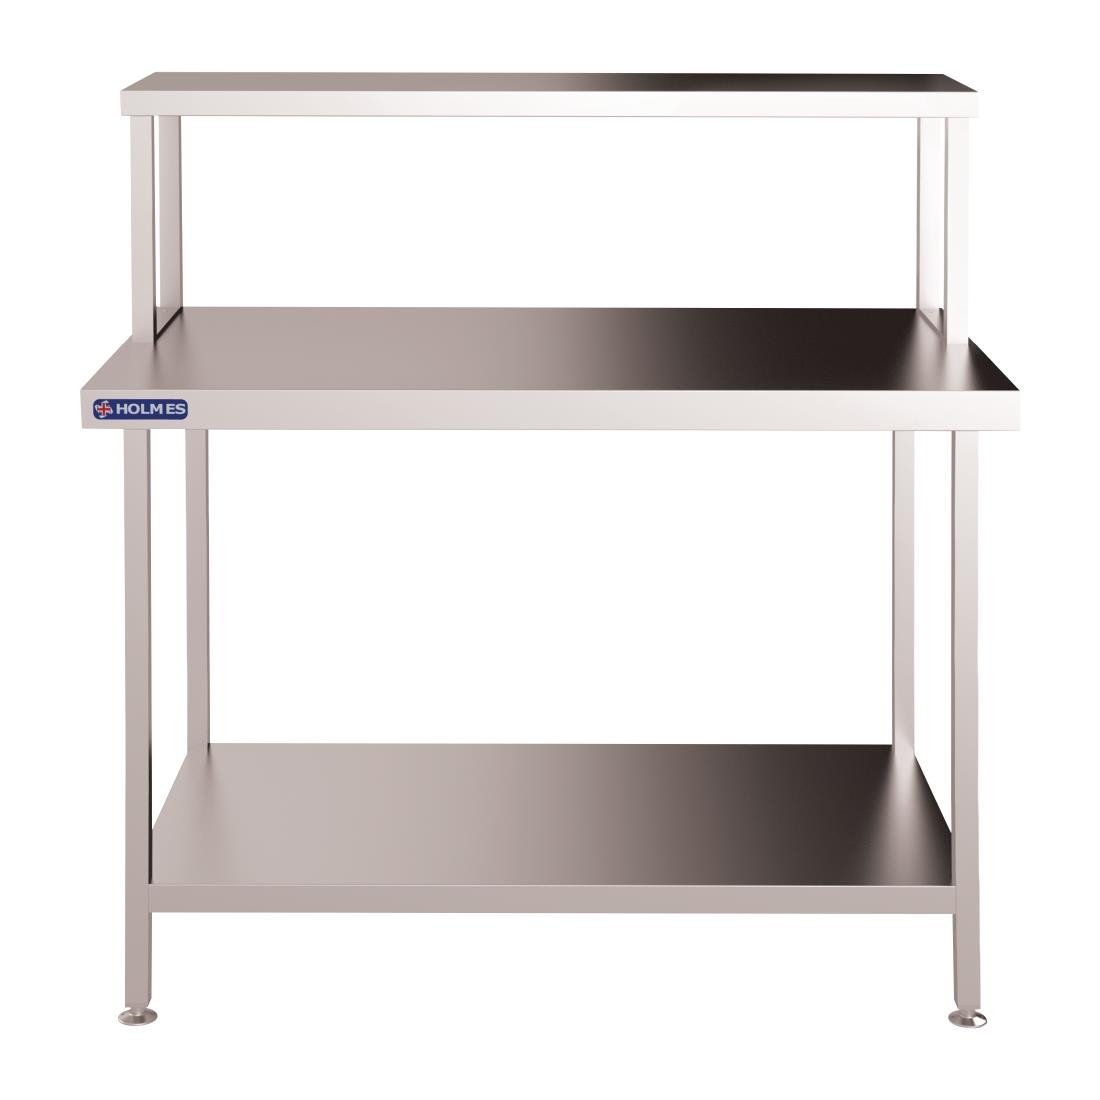 FC441 Holmes Stainless Steel Wall Table Welded with Gantry 1200mm JD Catering Equipment Solutions Ltd